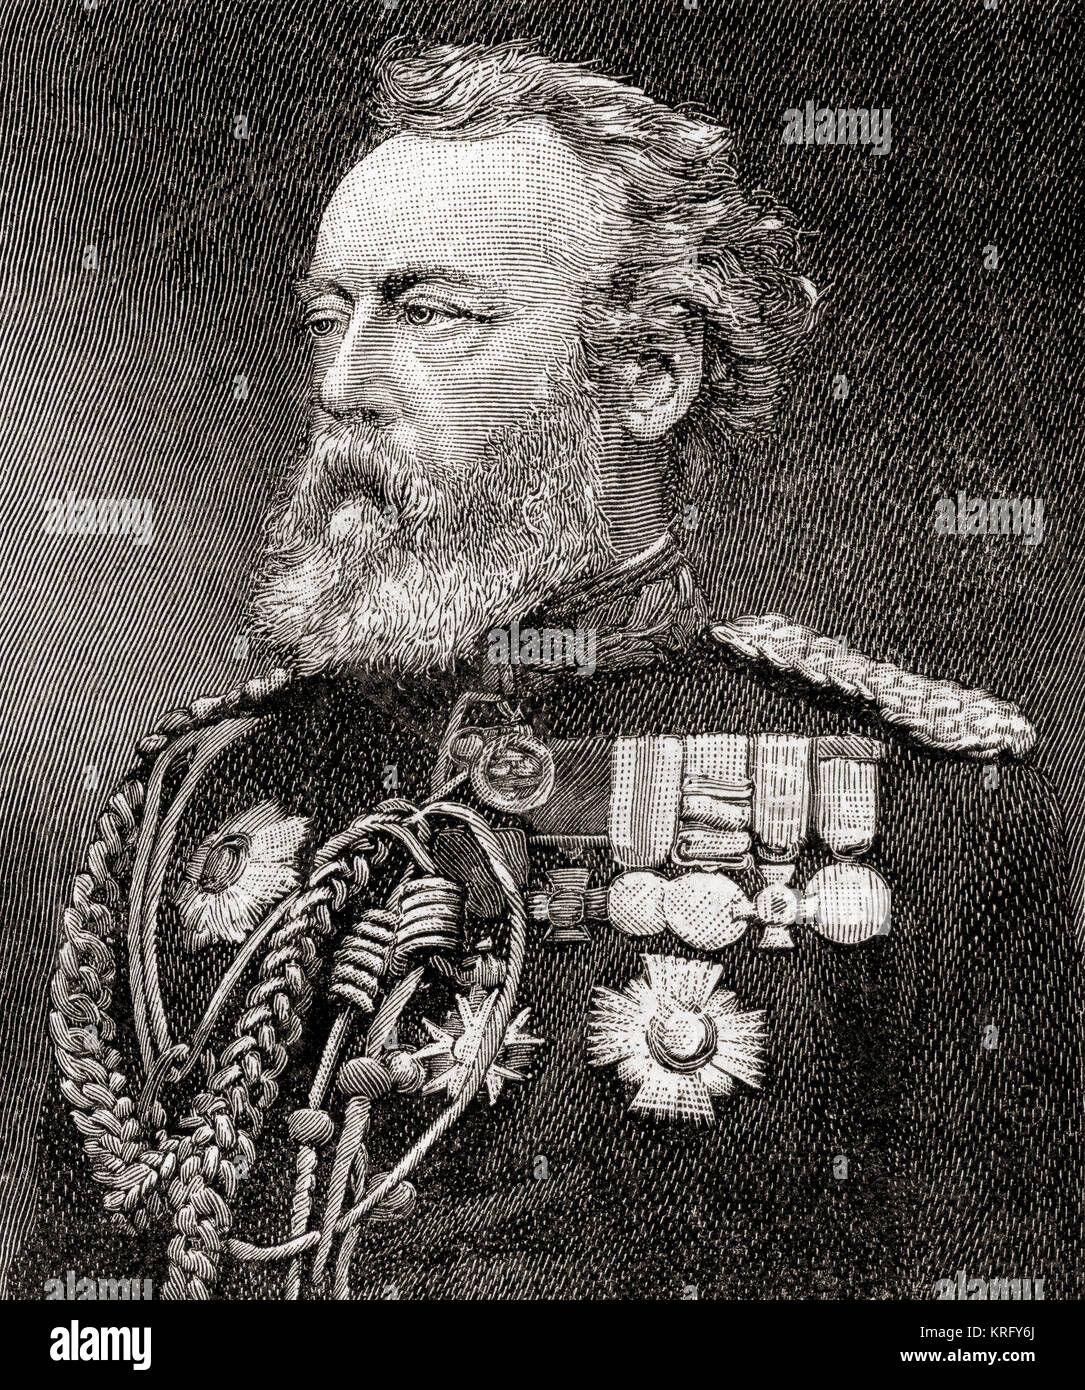 Brigadier General Robert James Loyd-Lindsay, 1st Baron Wantage, 1832 – 1901.  British soldier, politician, philanthropist, benefactor to Wantage, and one of the founders of the British National Society for Aid to the Sick and Wounded in War (later the British Red Cross Society).  Seen here aged 62.  From The Strand Magazine, published January to June 1894. Stock Photo